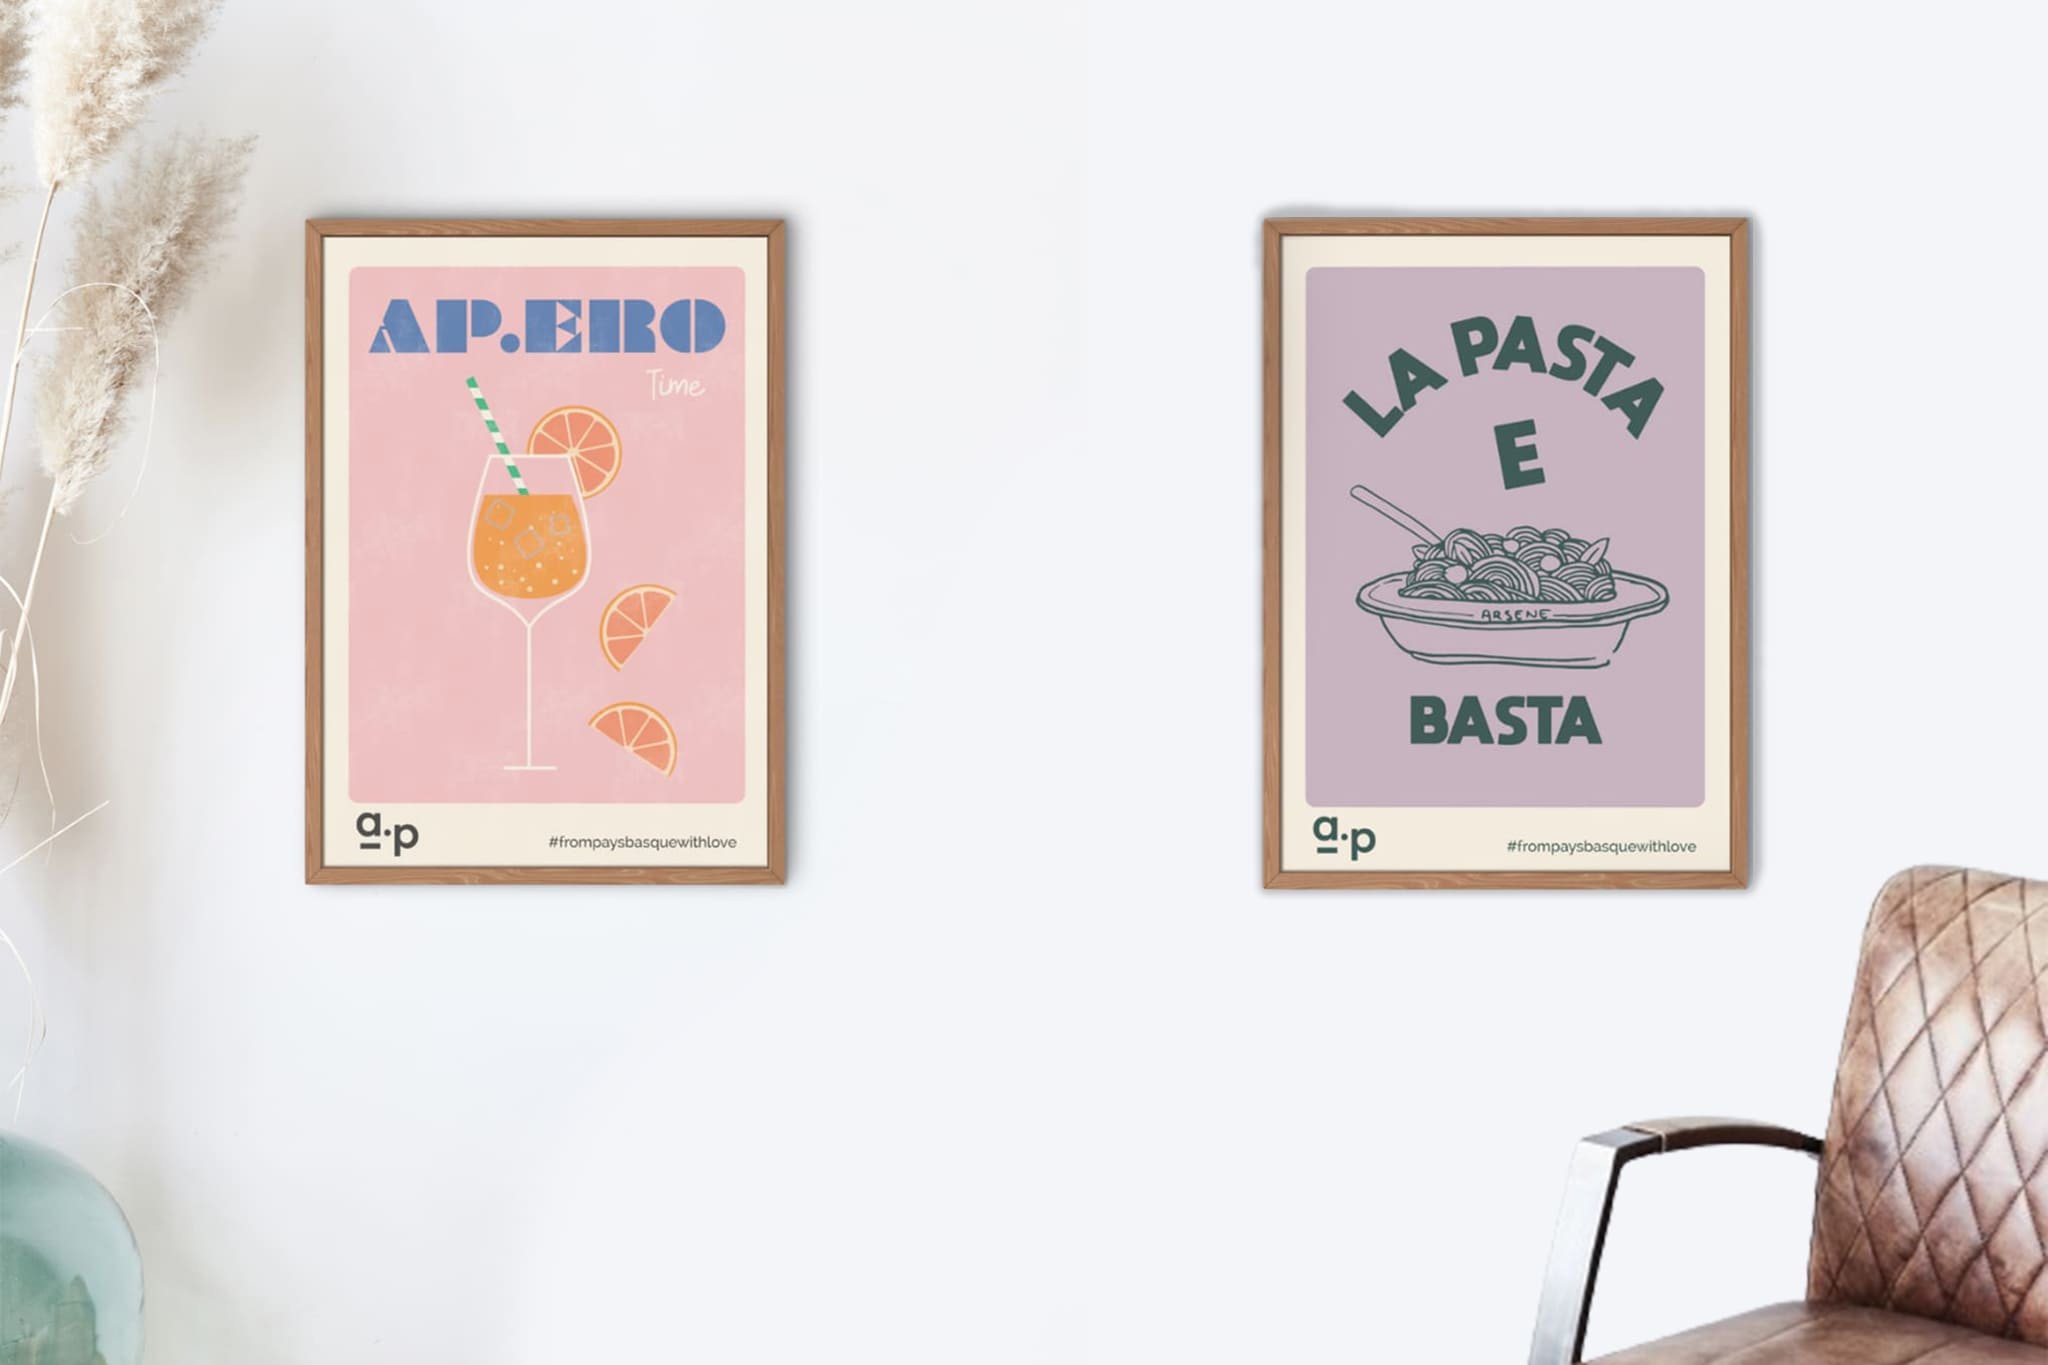 POSTERS A.P